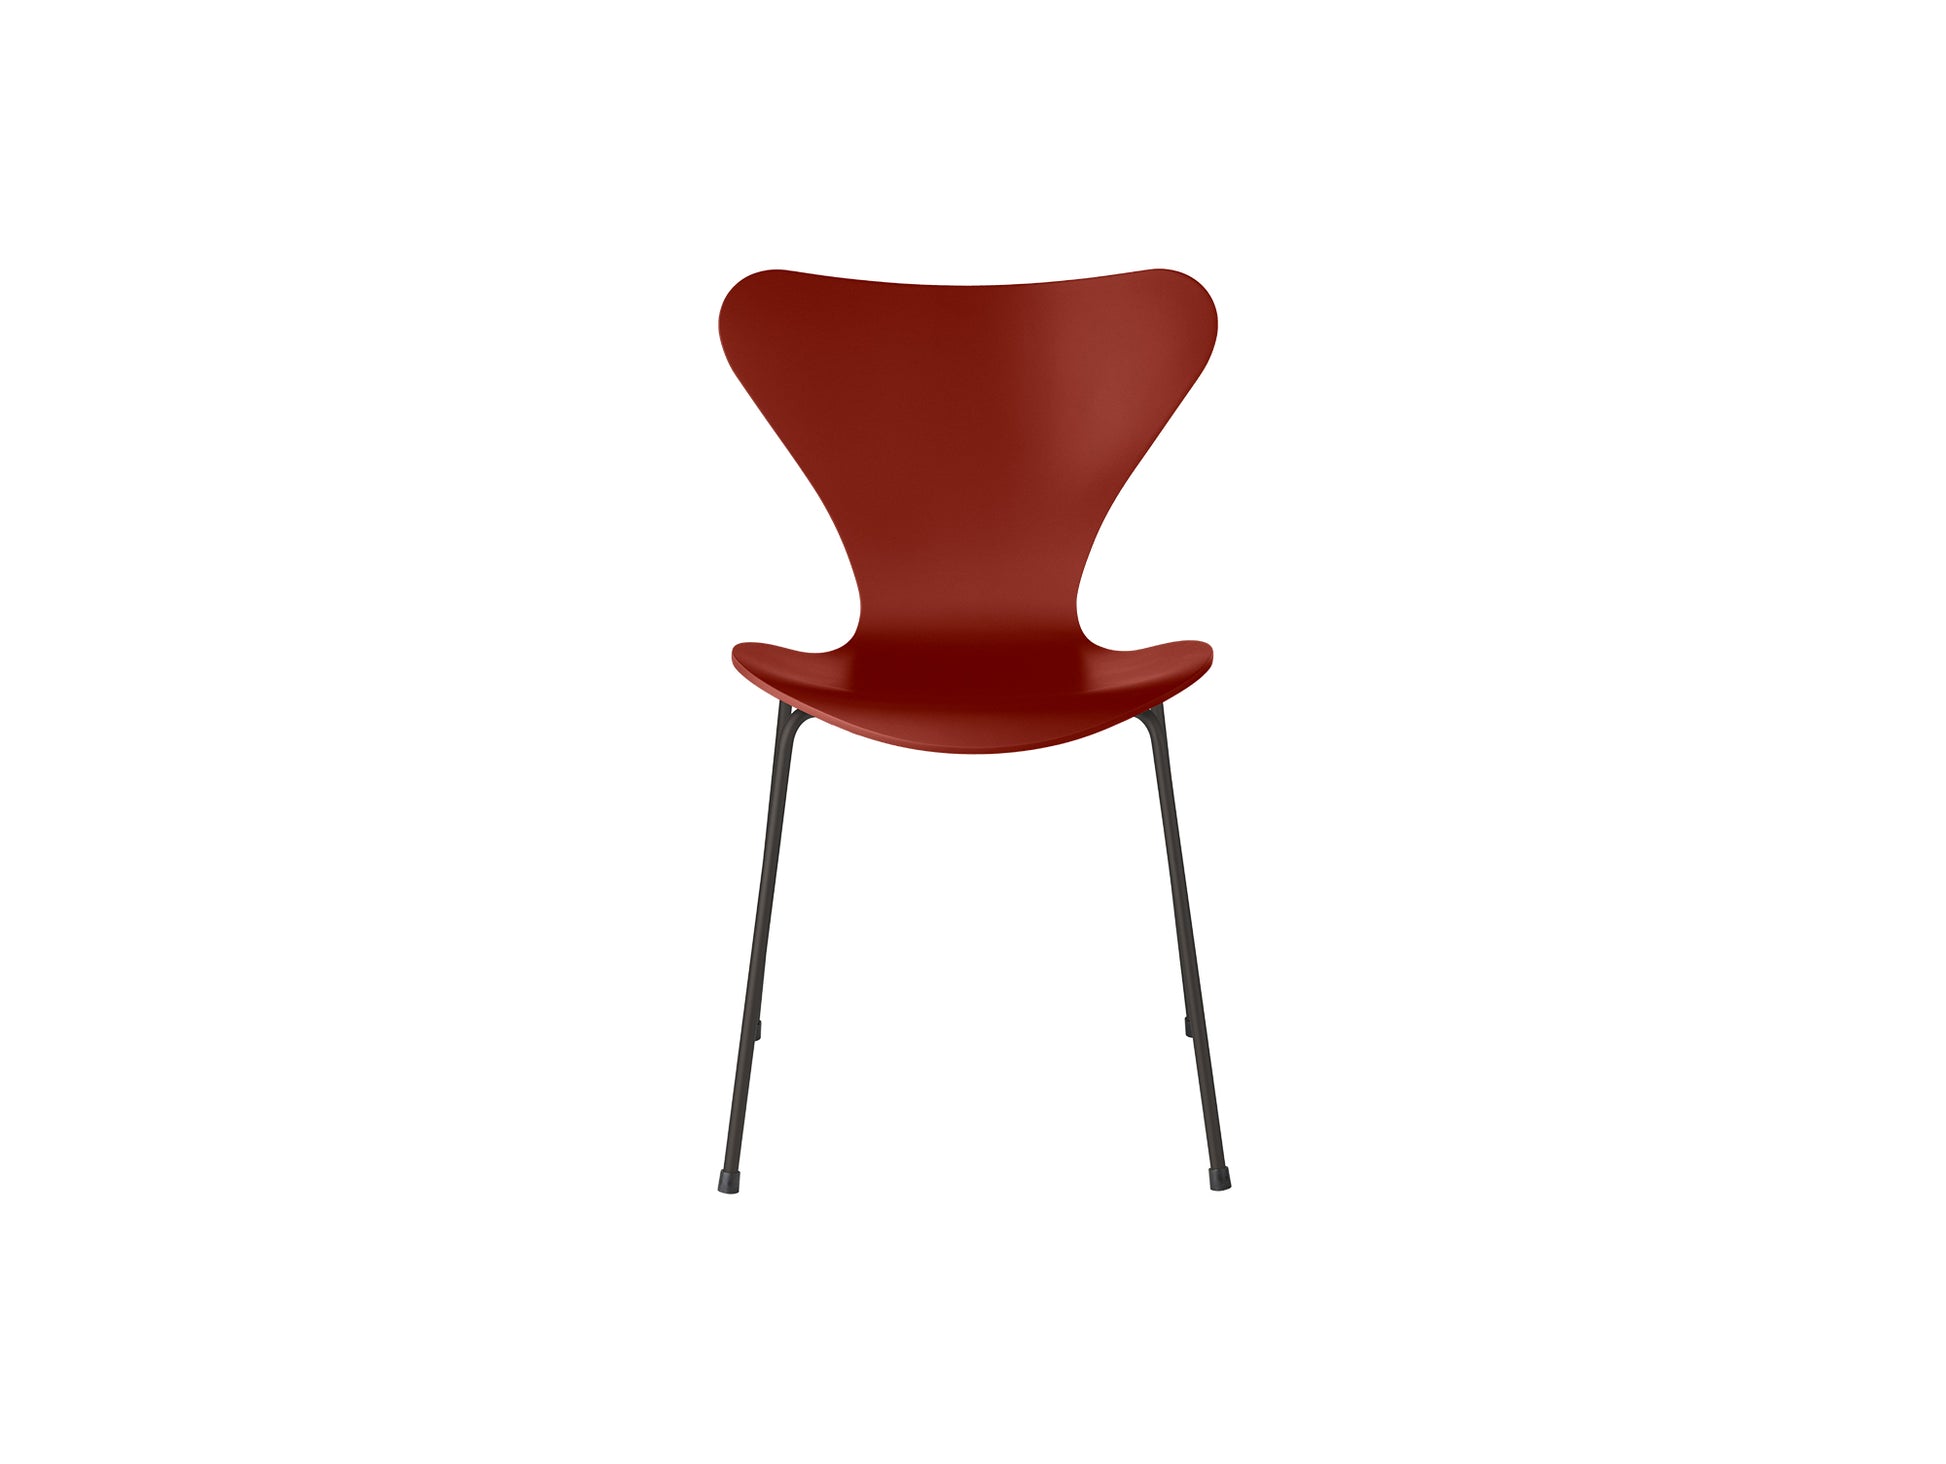 Series 7™ 3107 Dining Chair by Fritz Hansen - Venetian Red Lacquered Veneer Shell / Warm Graphite Steel